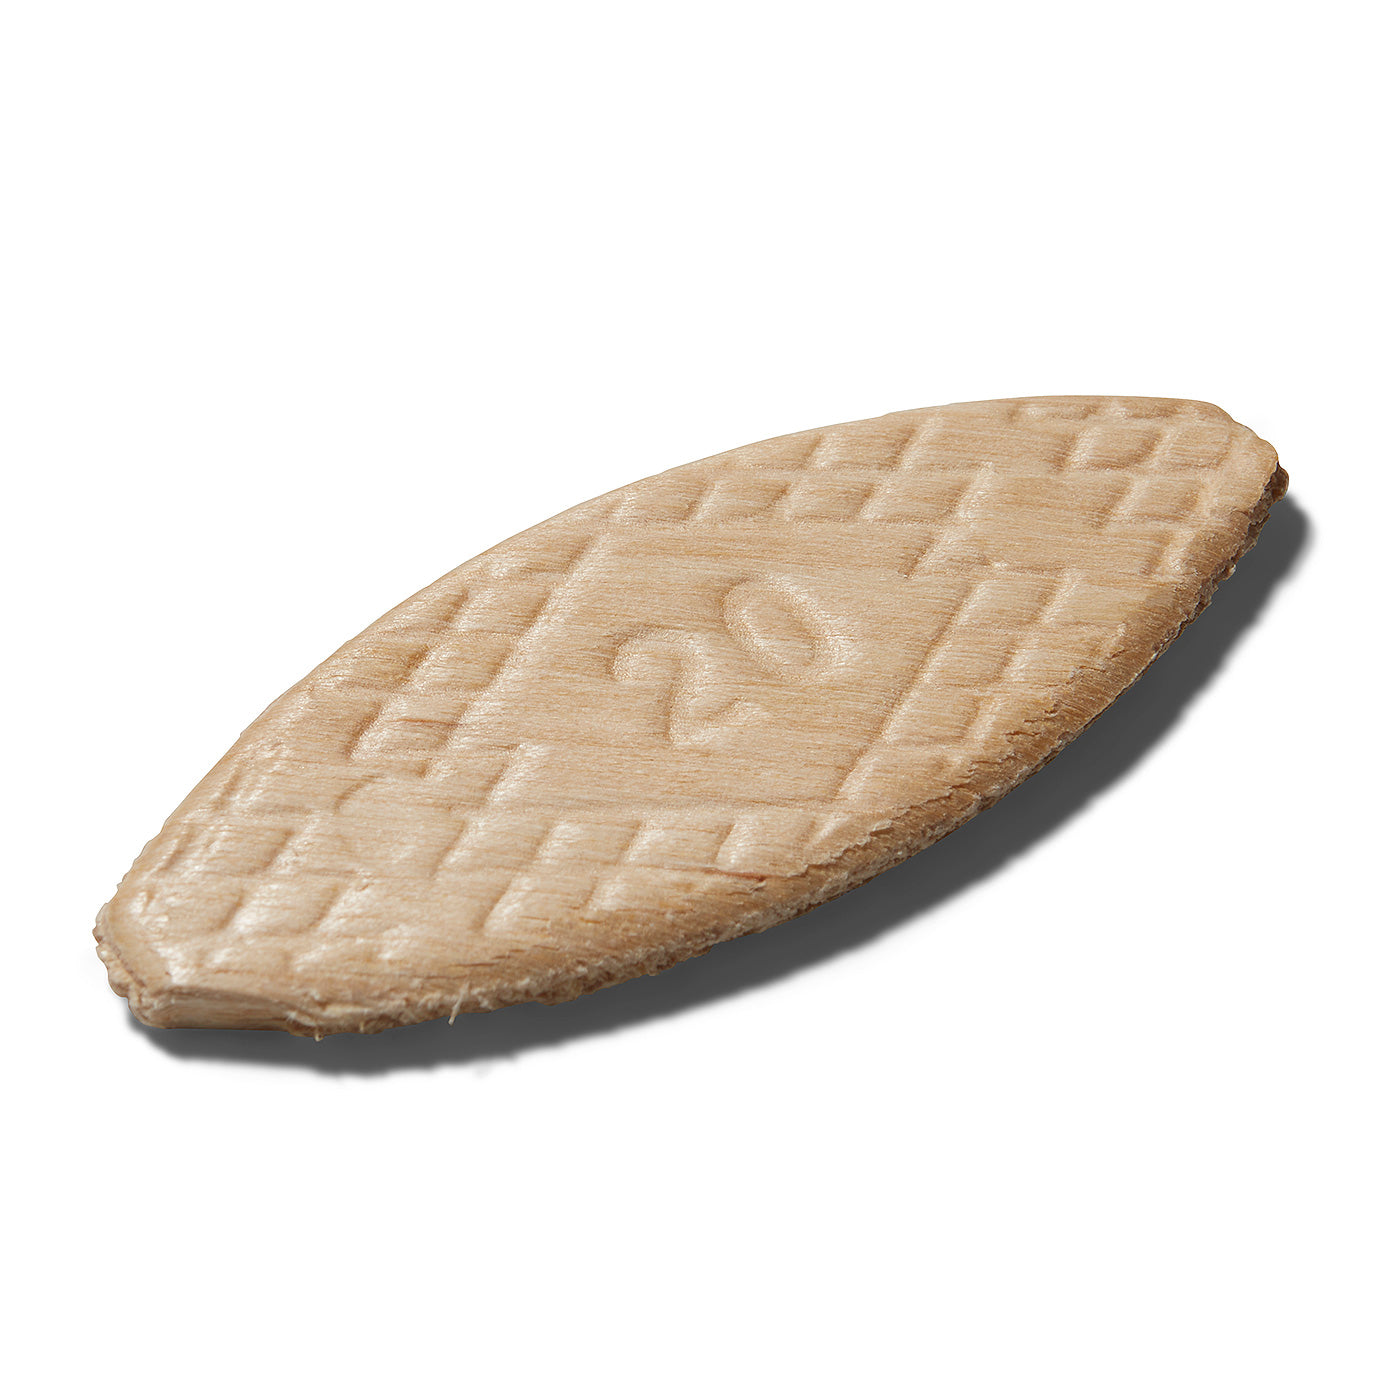 Biscuits - Mixed Pack of 750 